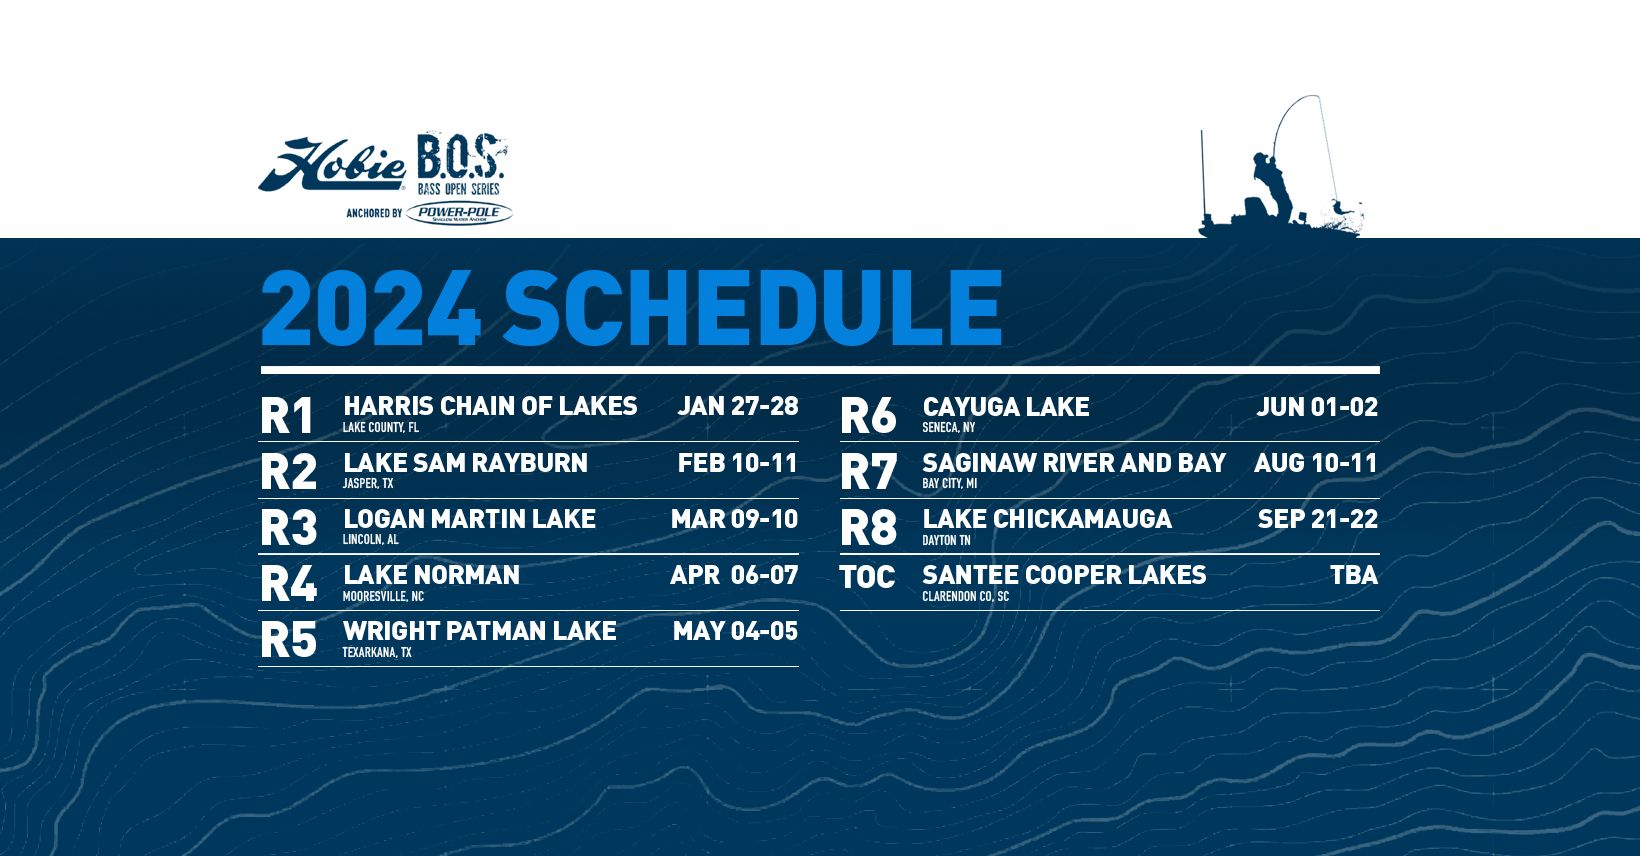 The 2024 schedule for Hobie Bass Open Series